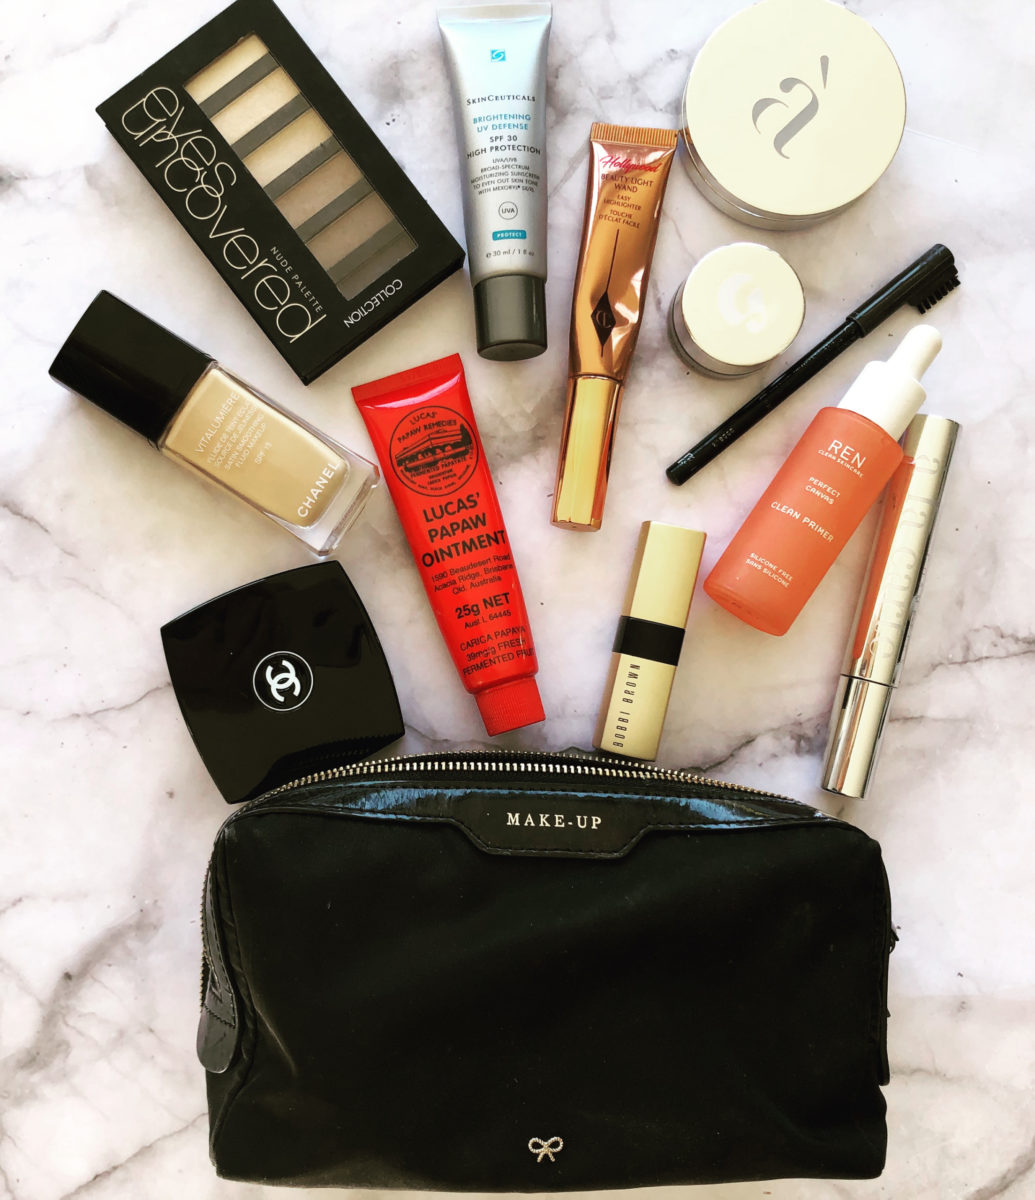 What’s in my make-up bag? Camilla shares her make-up staples - Luminous ...